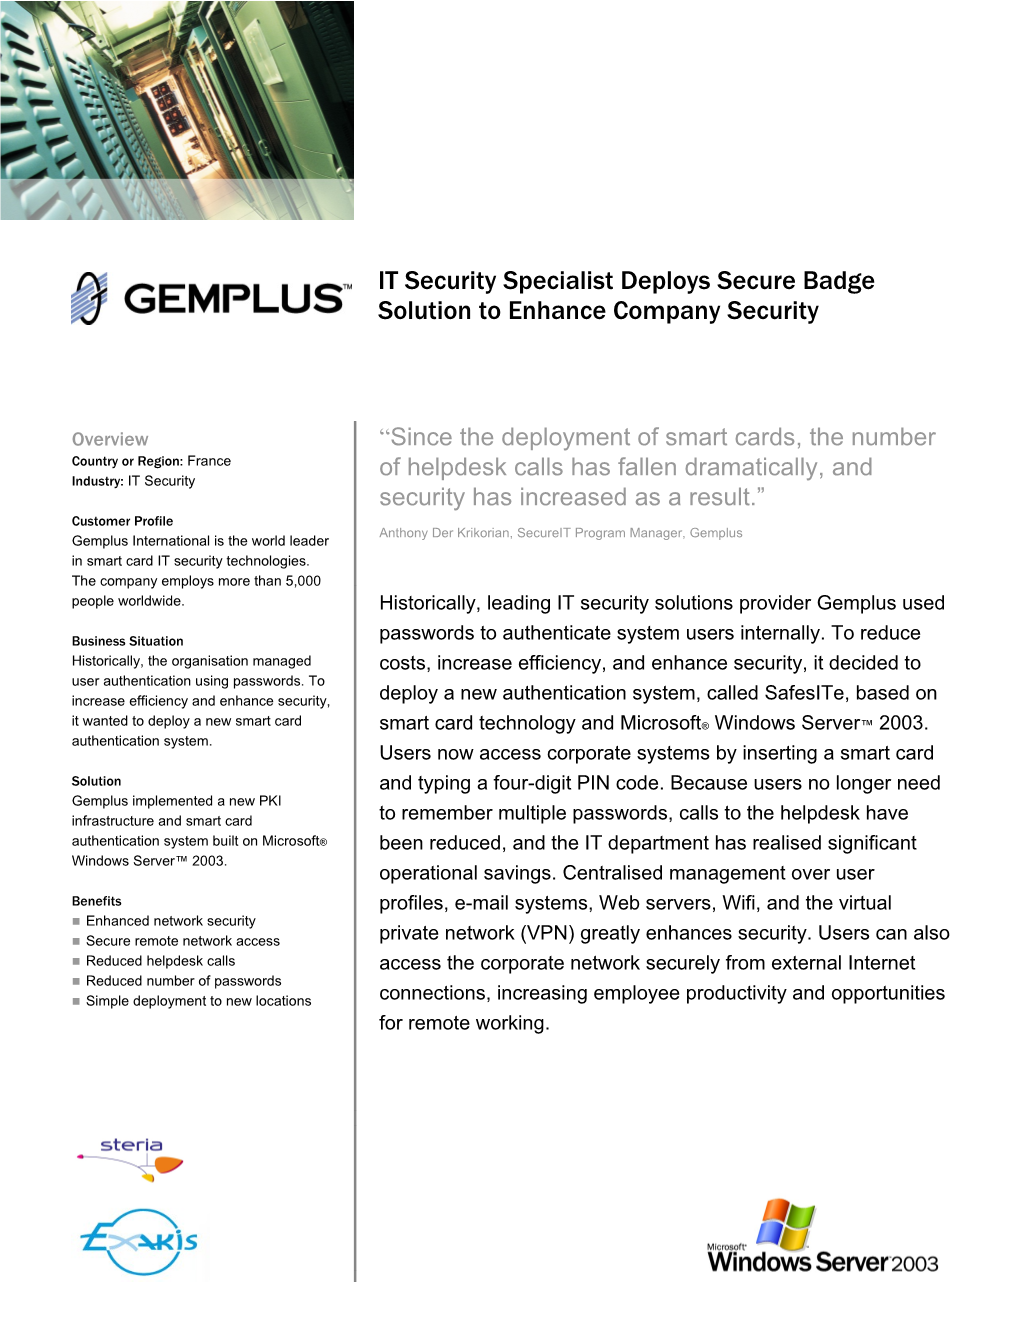 IT Security Specialist Deploys Secure Badge Solution to Enhance Company Security